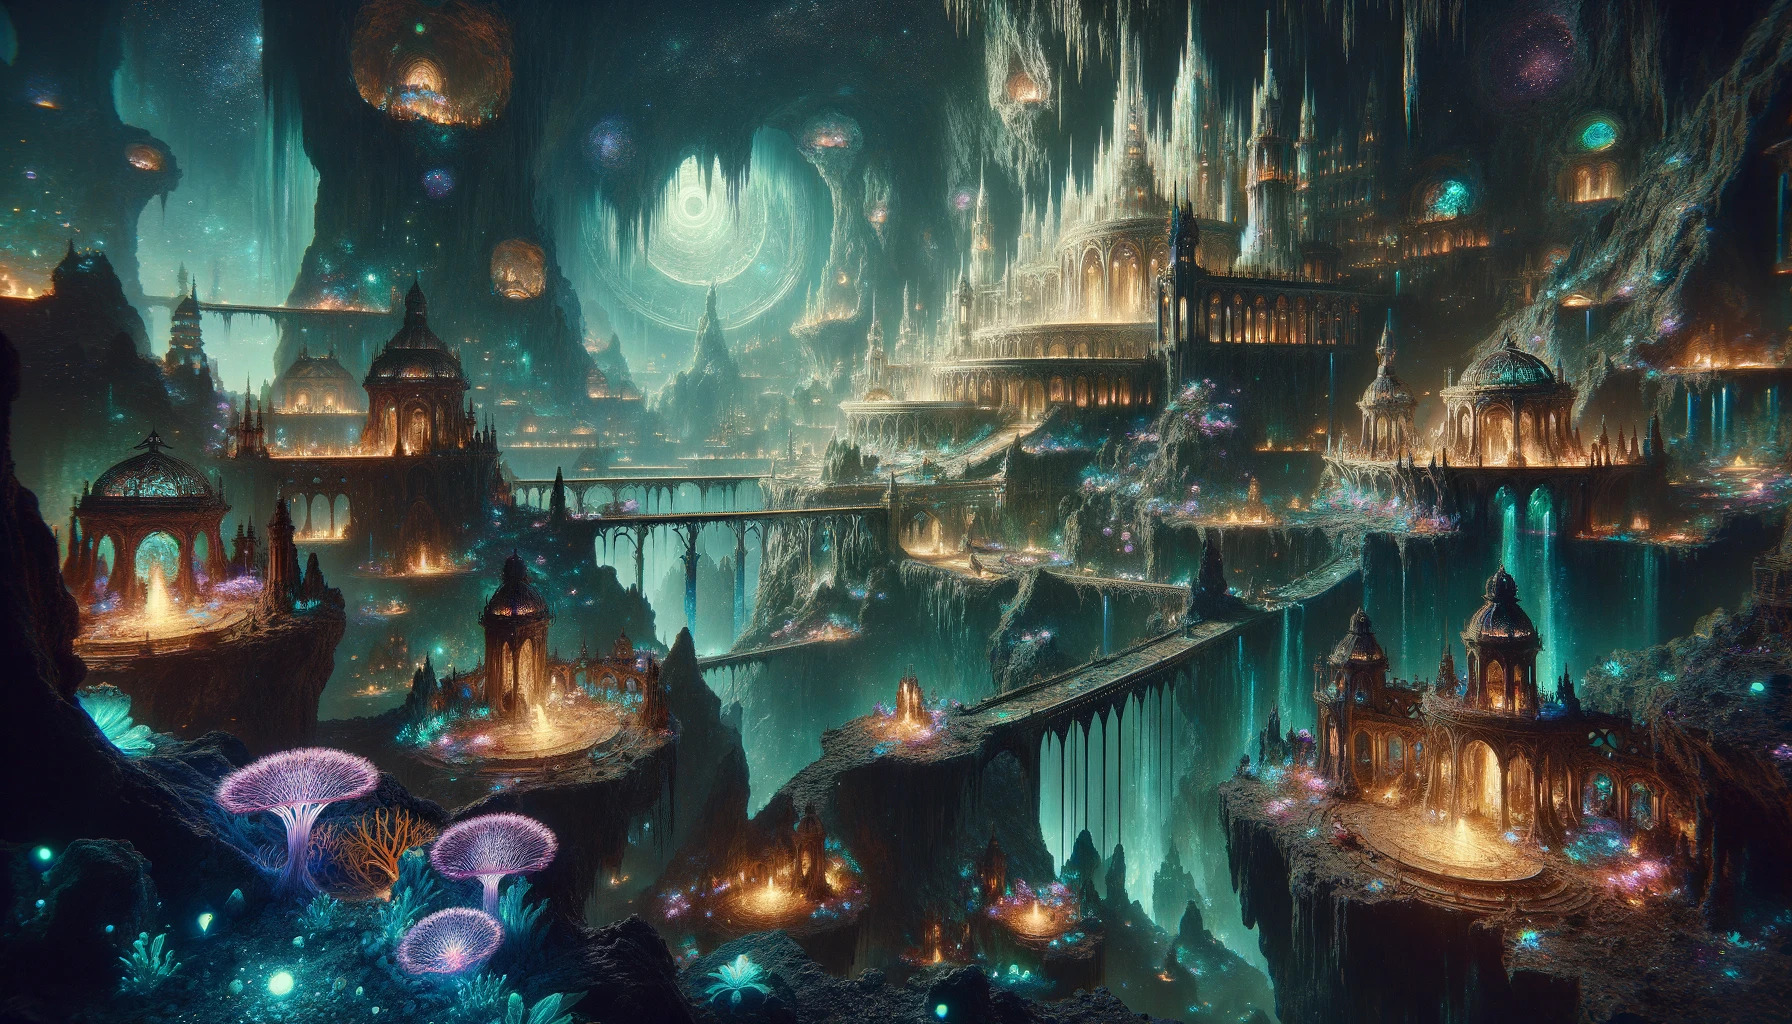 a cinematic image that captures the essence of a mysterious and enchanting underground Drow city, illuminated by magical glowing fungi and crystal formations. The intricate architecture and ethereal atmosphere of this subterranean world are vividly portrayed, offering a glimpse into the beauty and mystique of the Drow civilization.